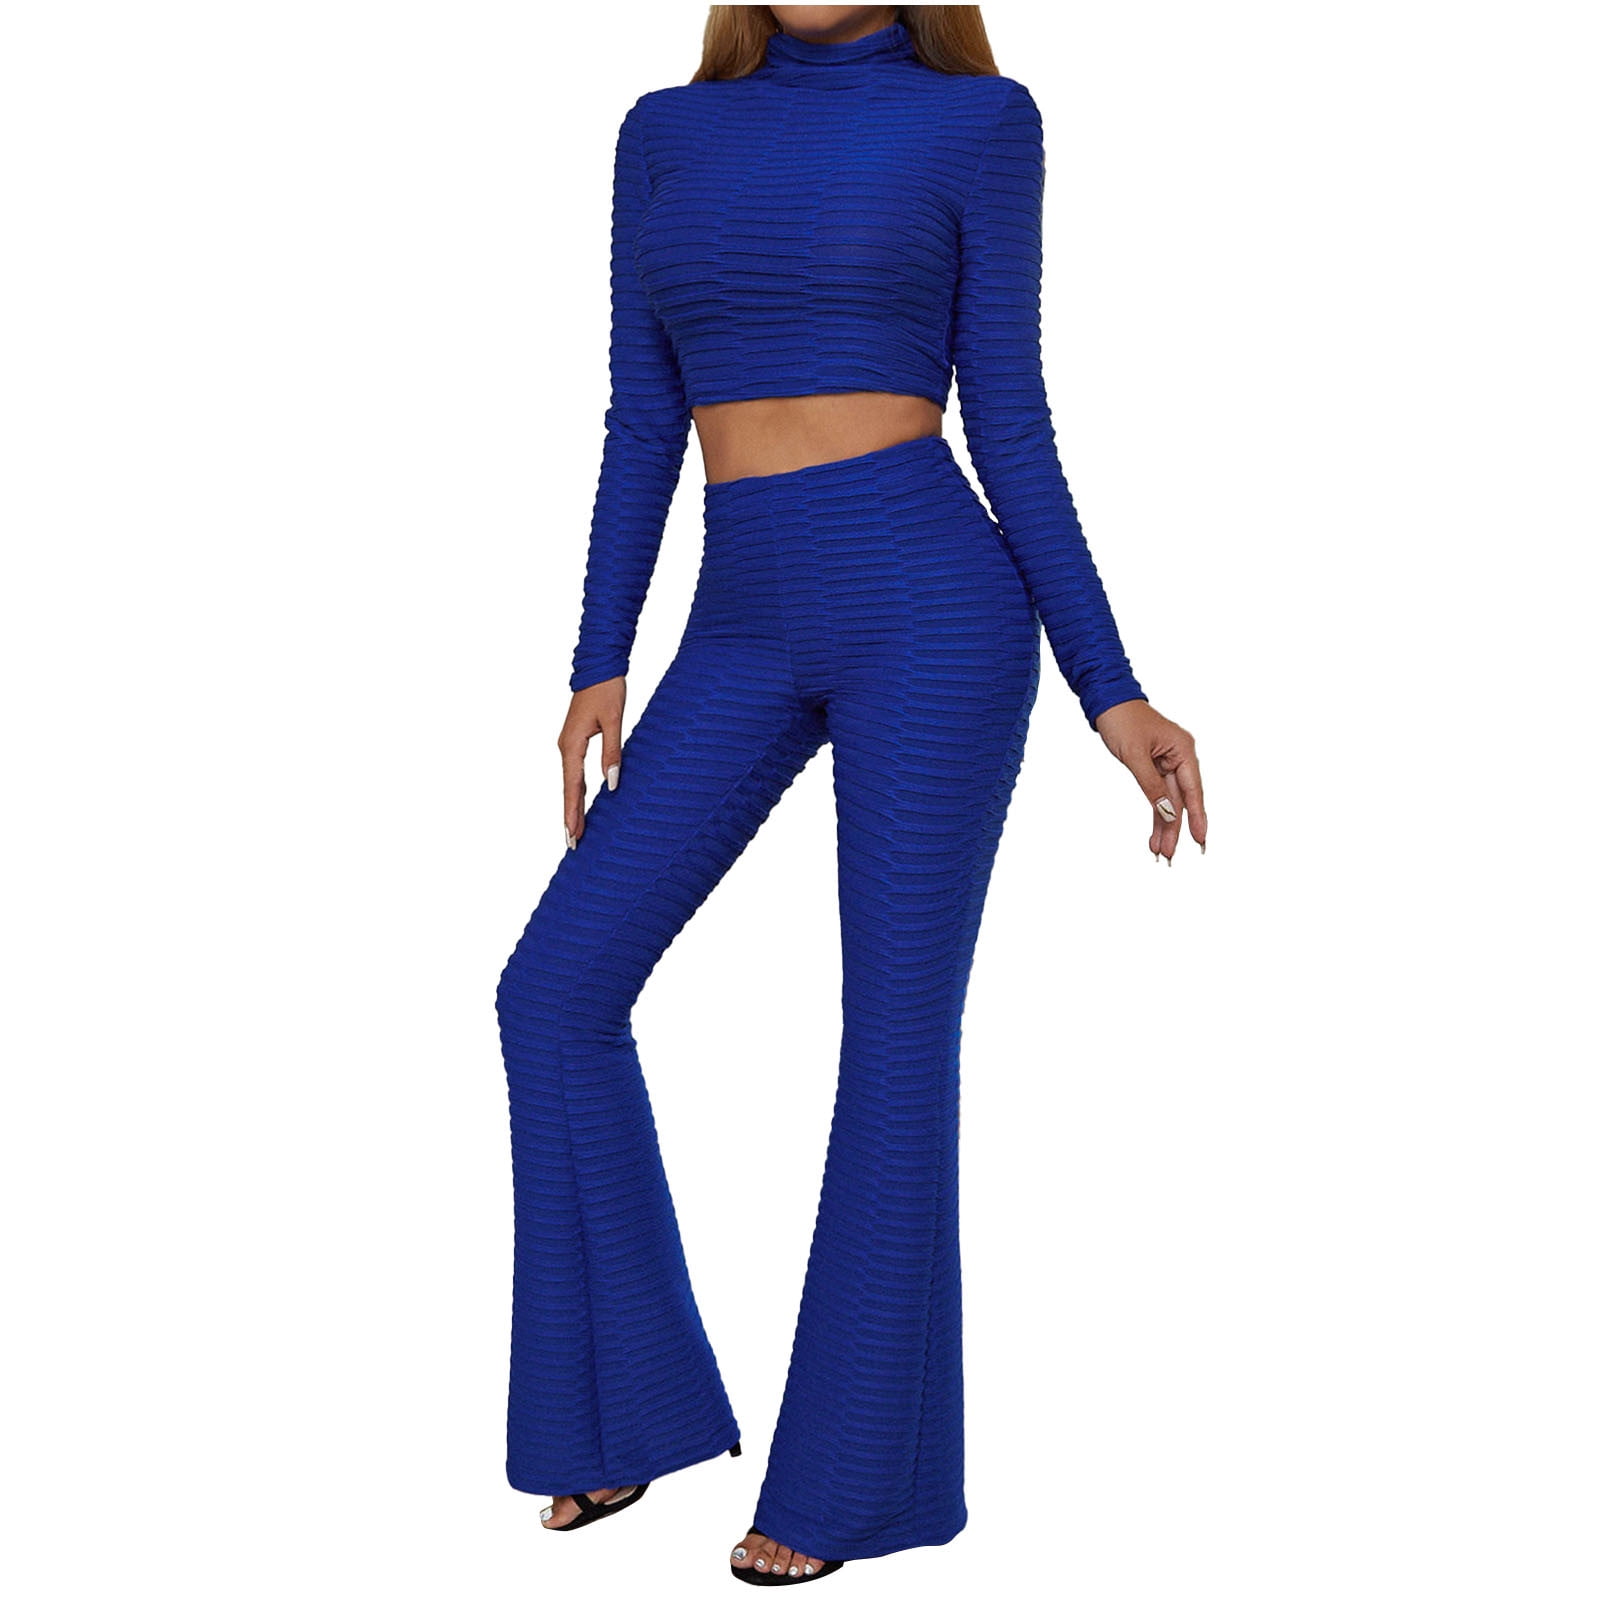 Two Piece Outfits for Women Textured Long Sleeve Turtleneck Crop Top +  Stretchy Bell Bottom Long Pants Trousers Sets 